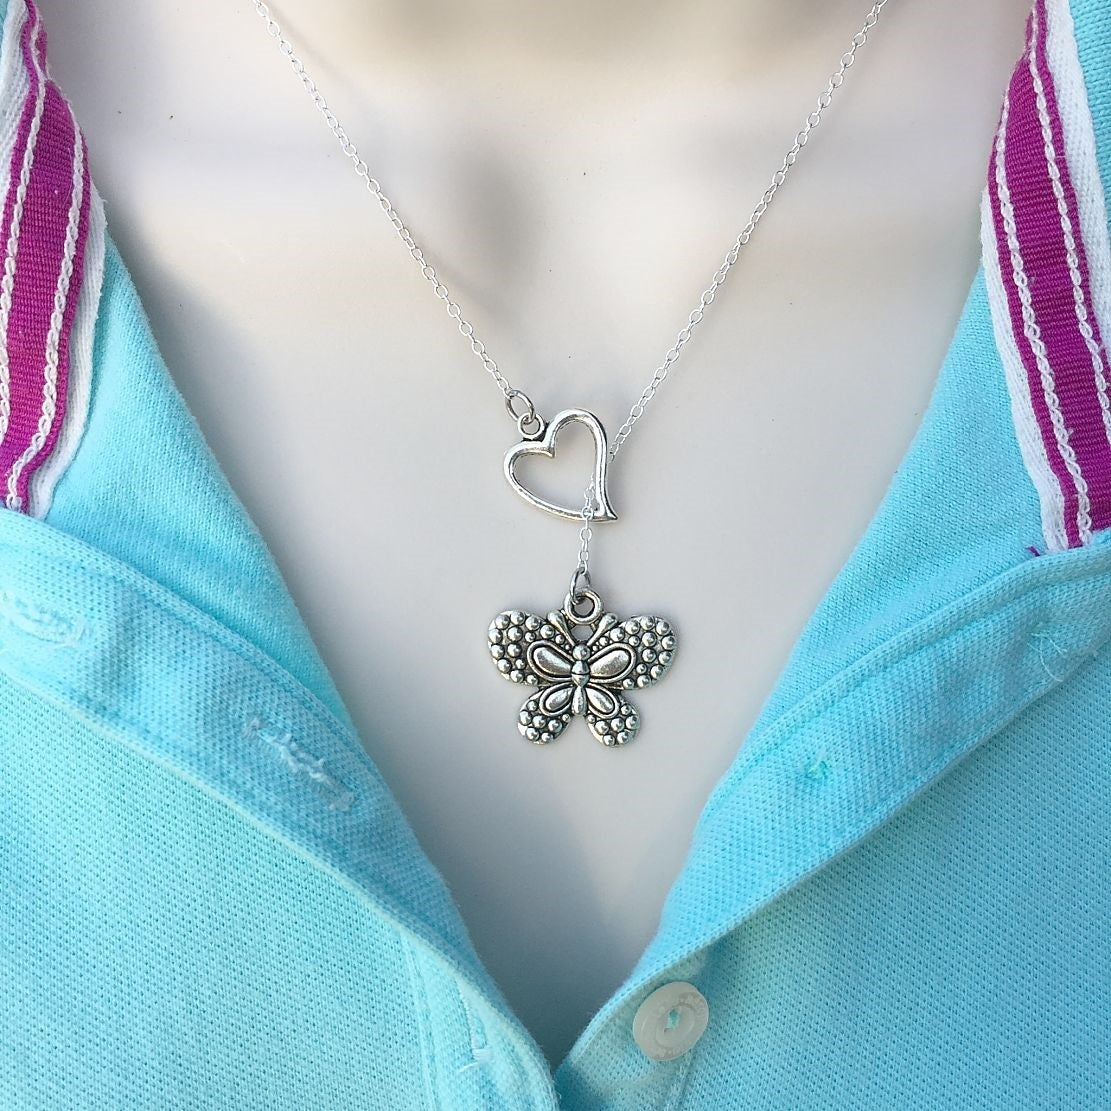 I Love Butterfly Handcrafted Silver Lariat Y Necklace.